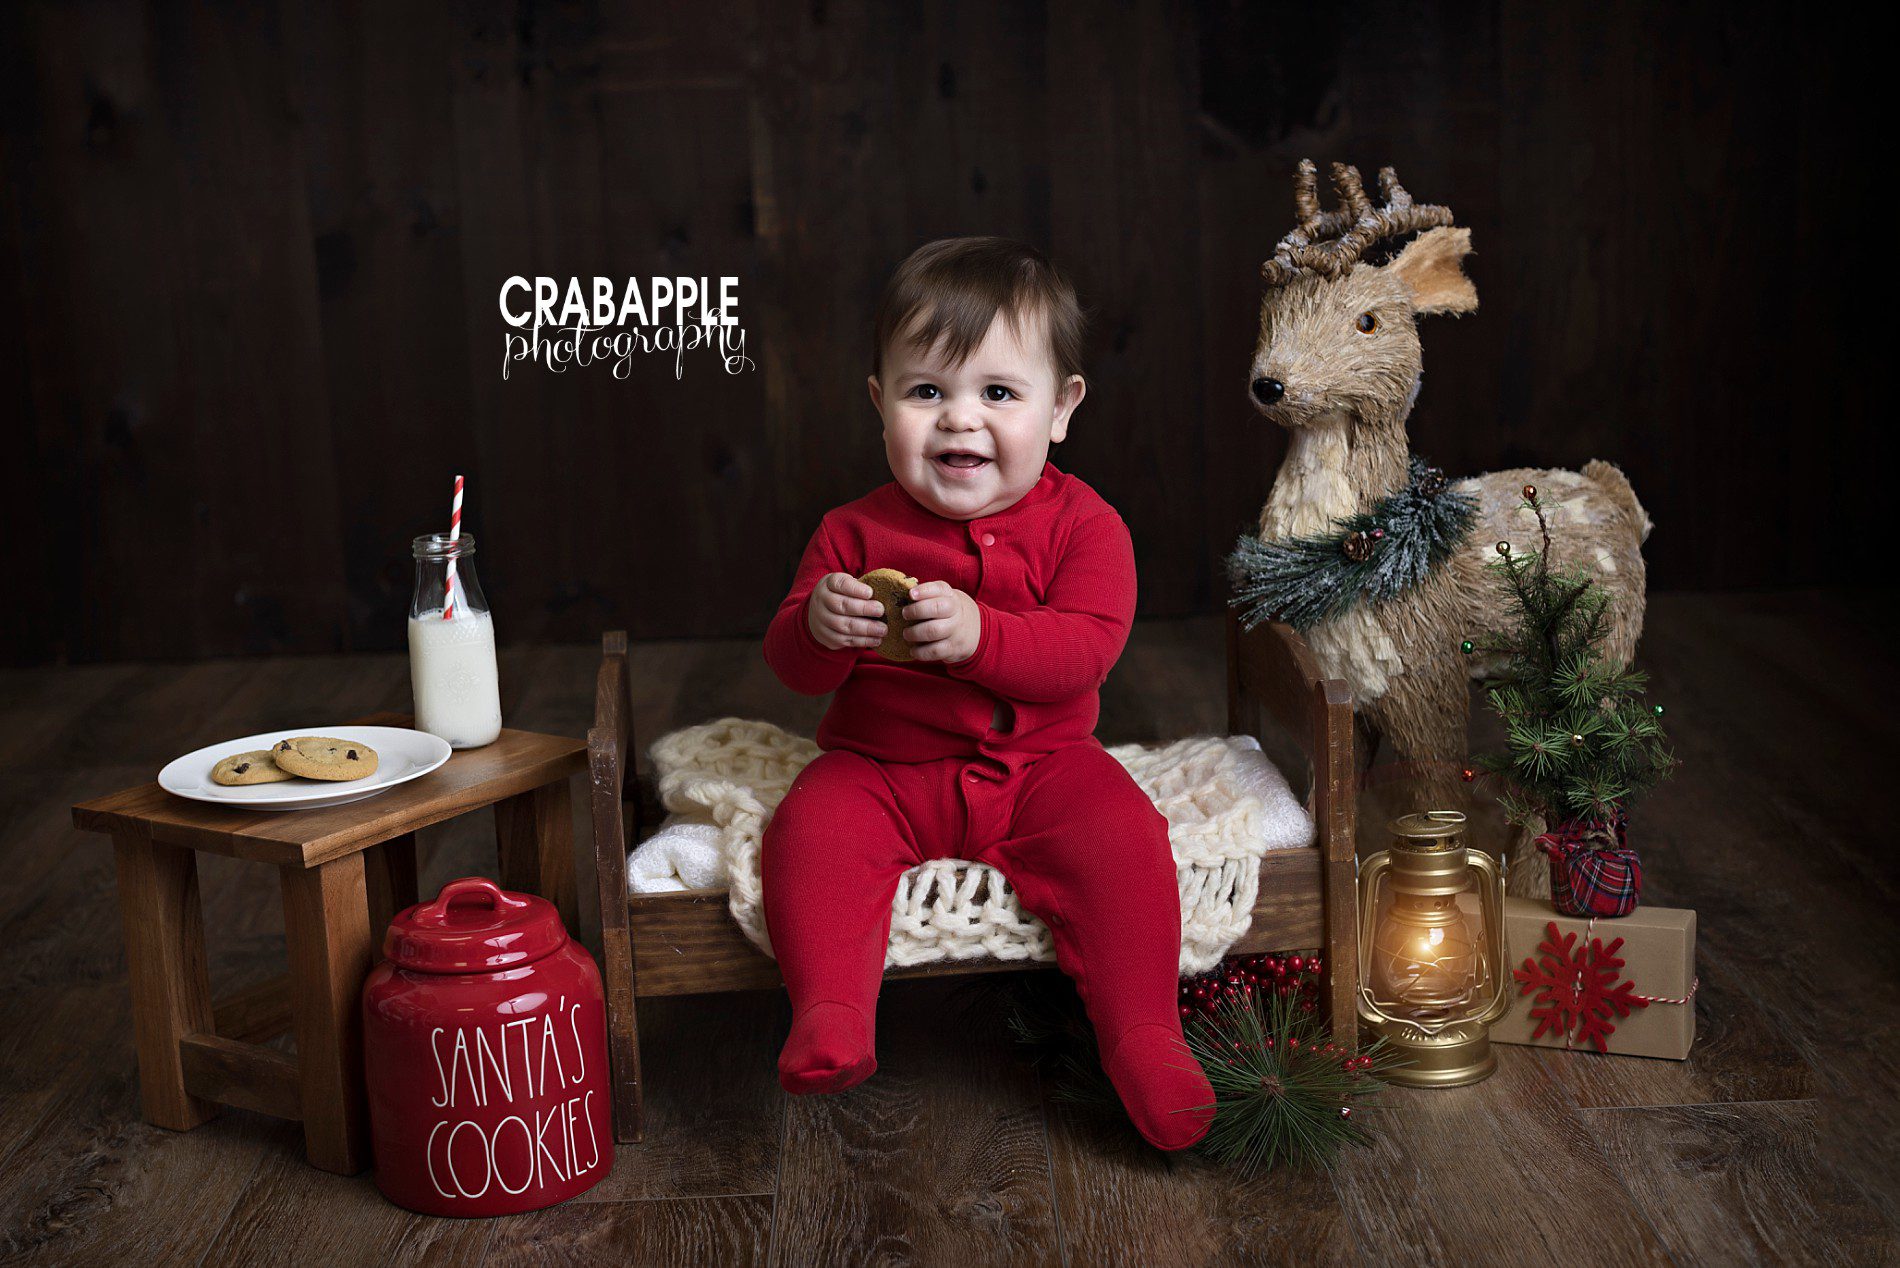 Santa's Cookies themed baby portraits using props and accessories.